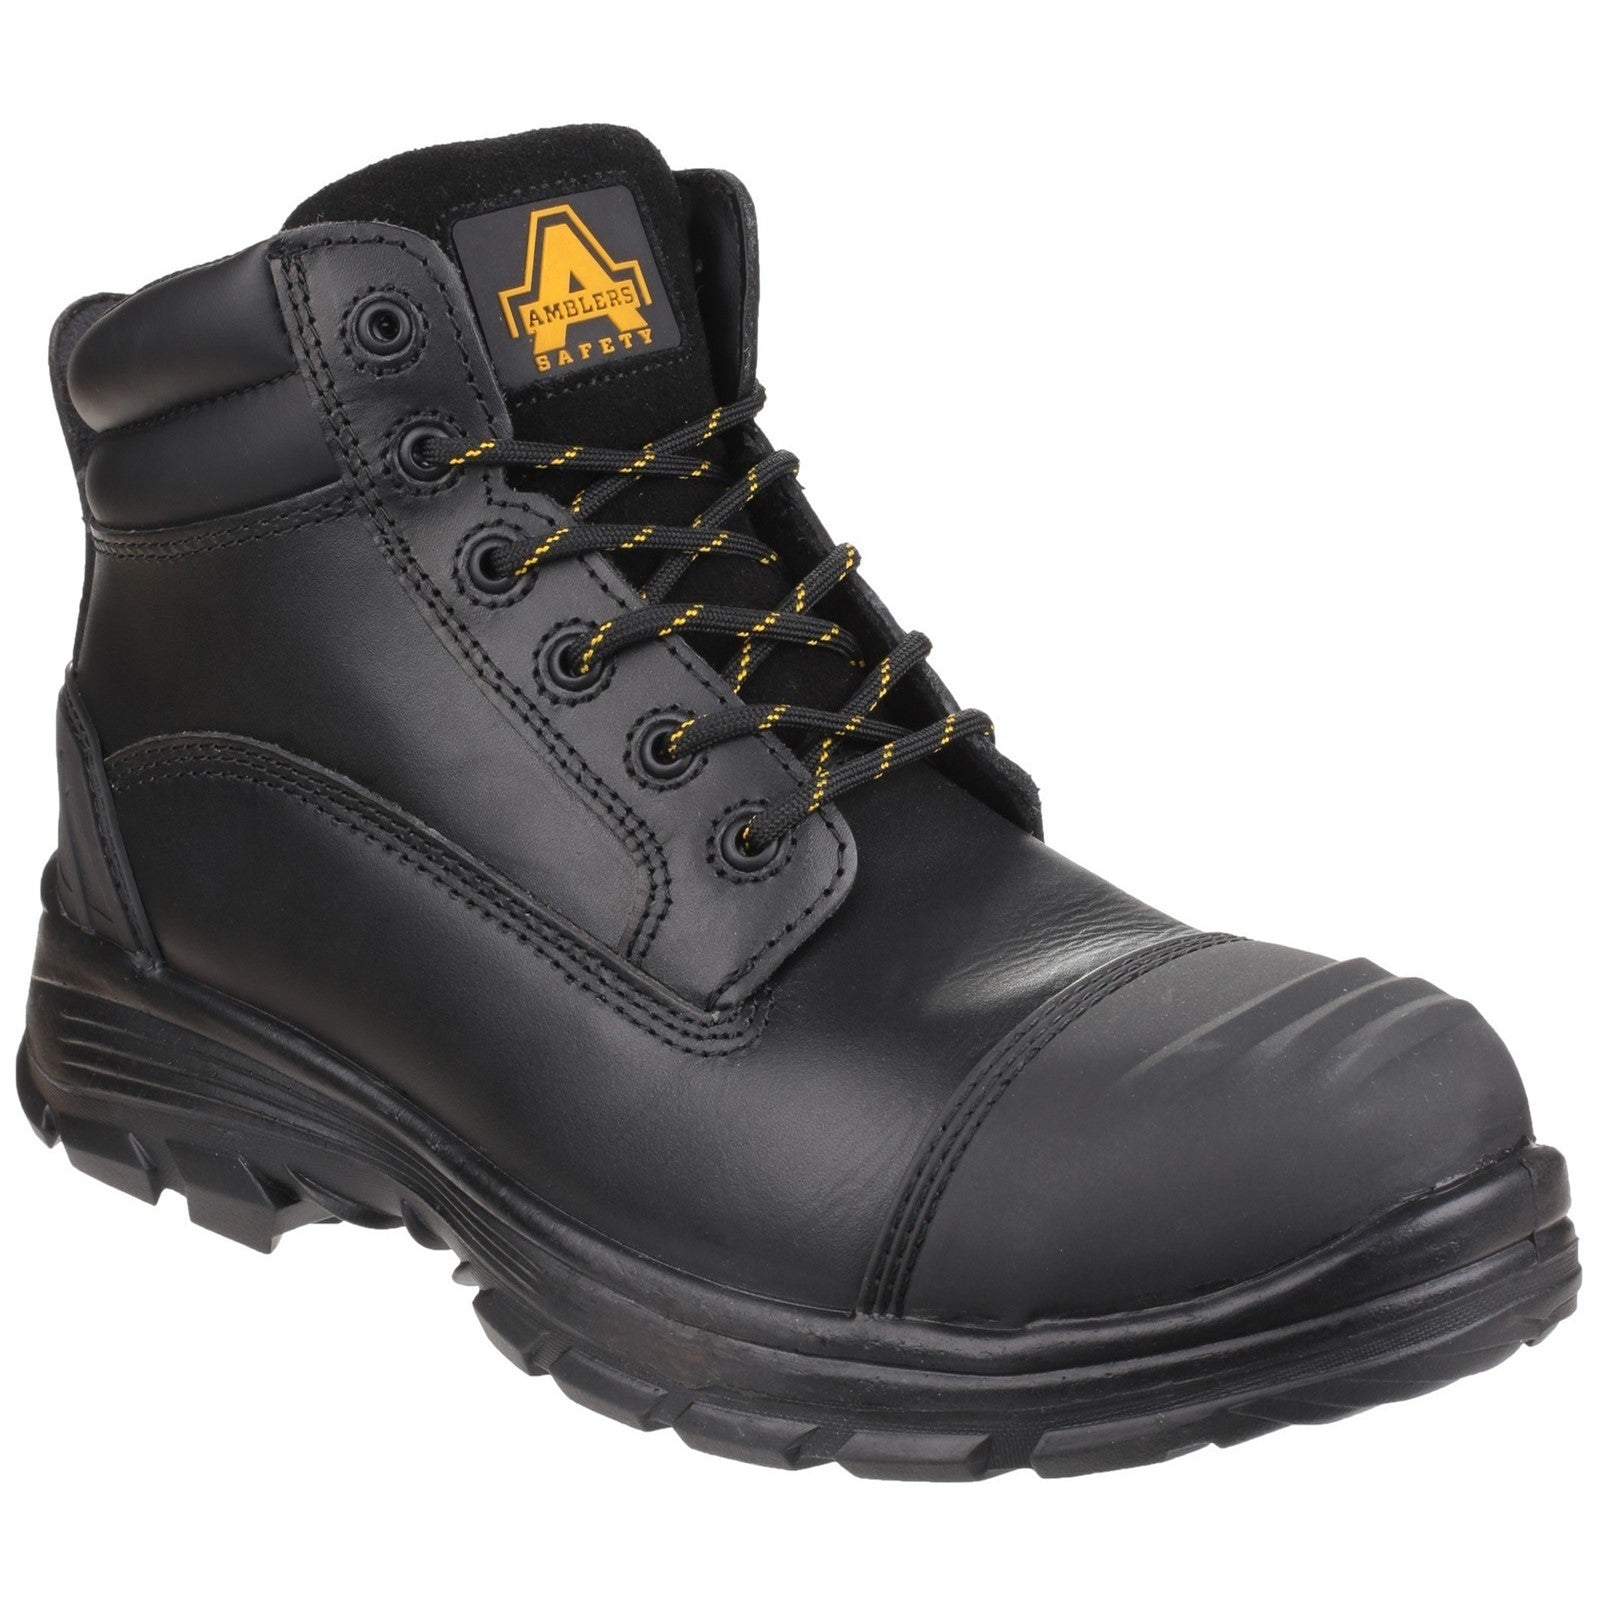 Amblers AS201 QUANTOK S3 PU/RUBBER SAFETY BOOT